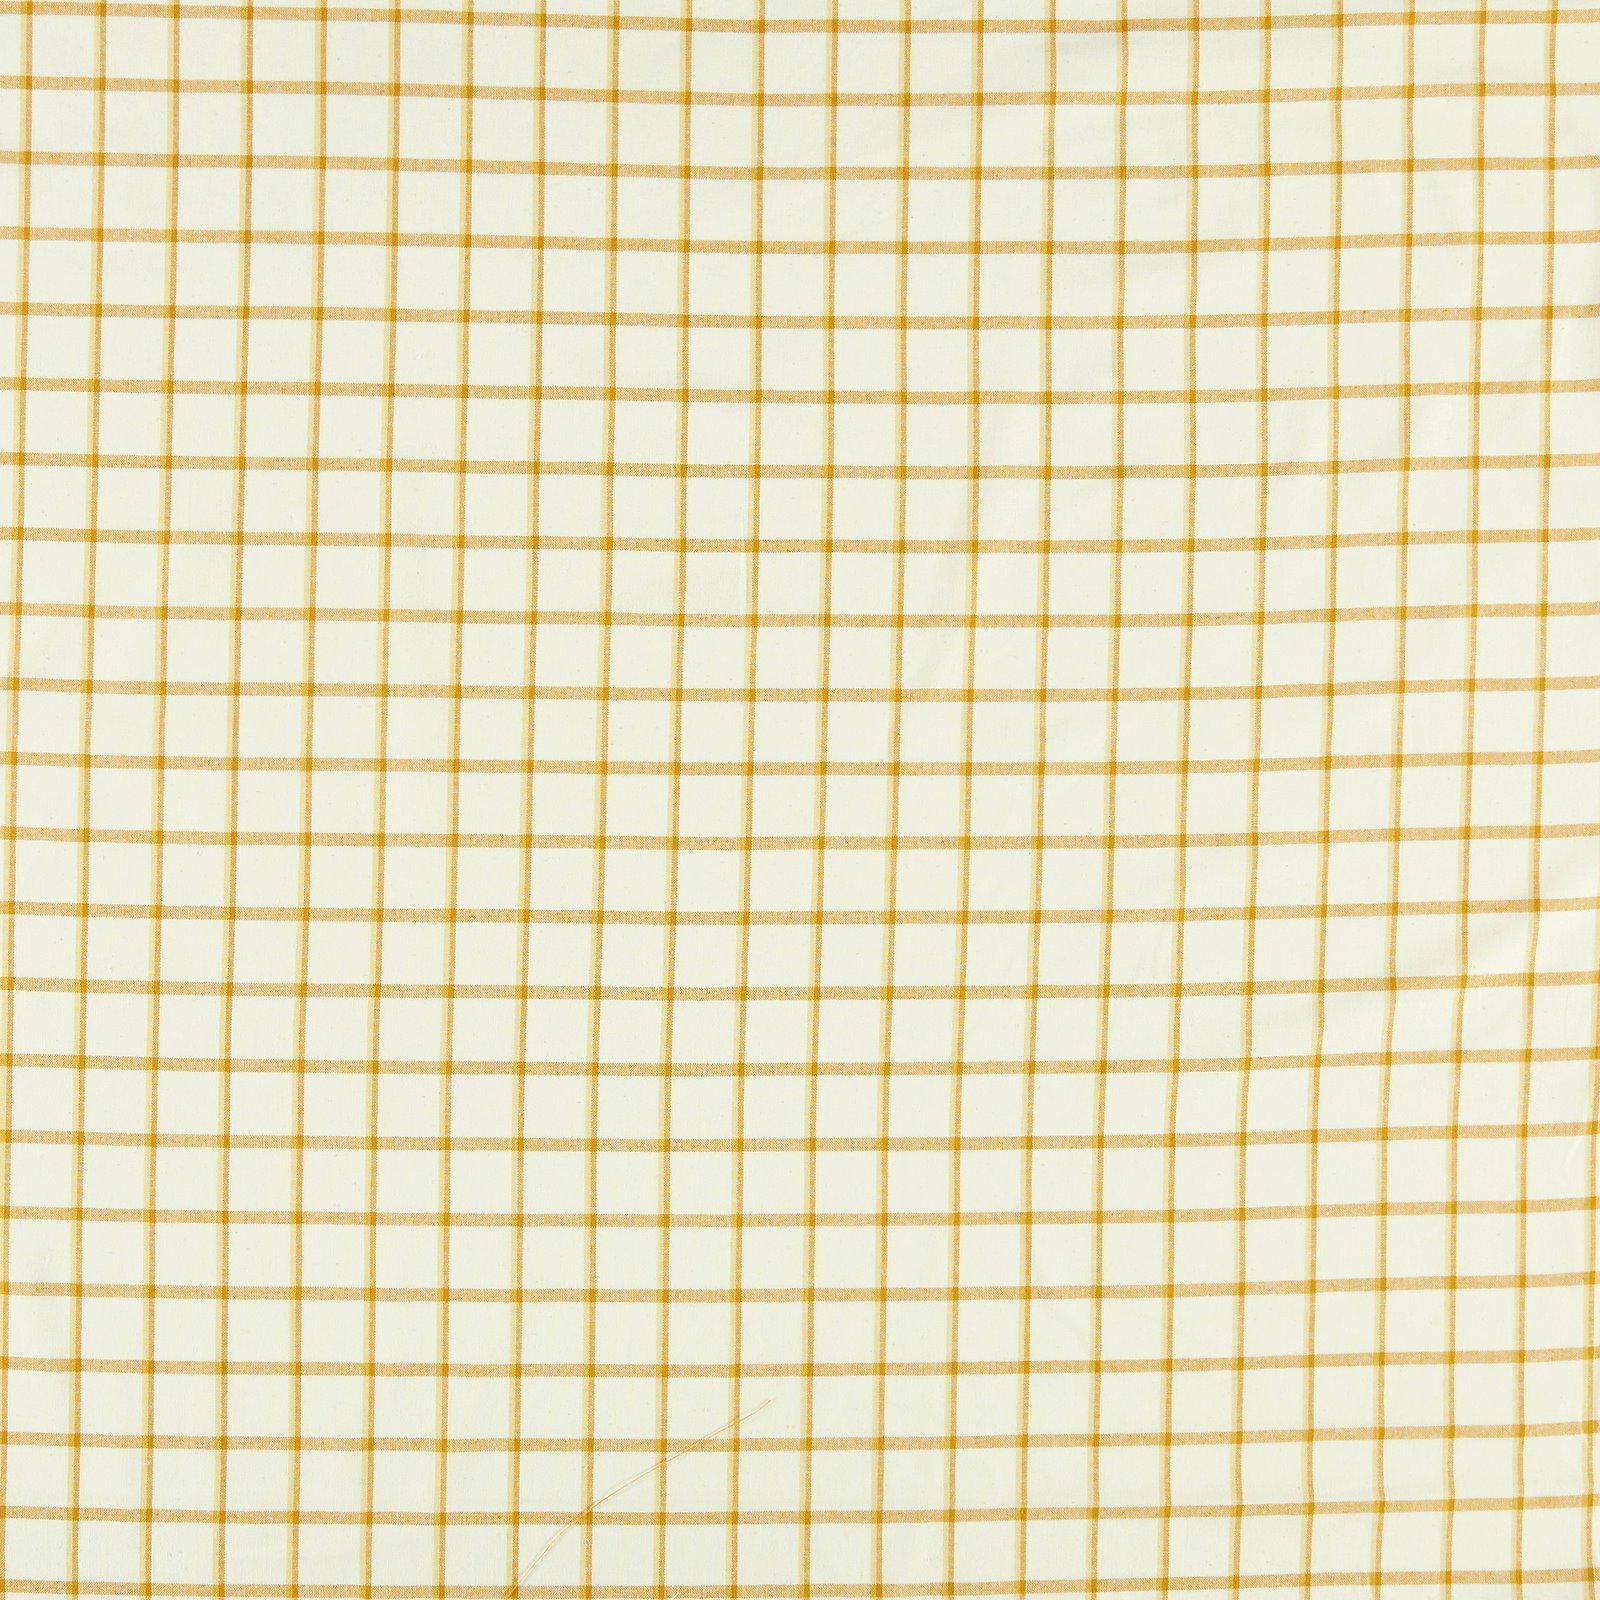 Woven cotton offwhite/yellow YD check 816303_pack_lp